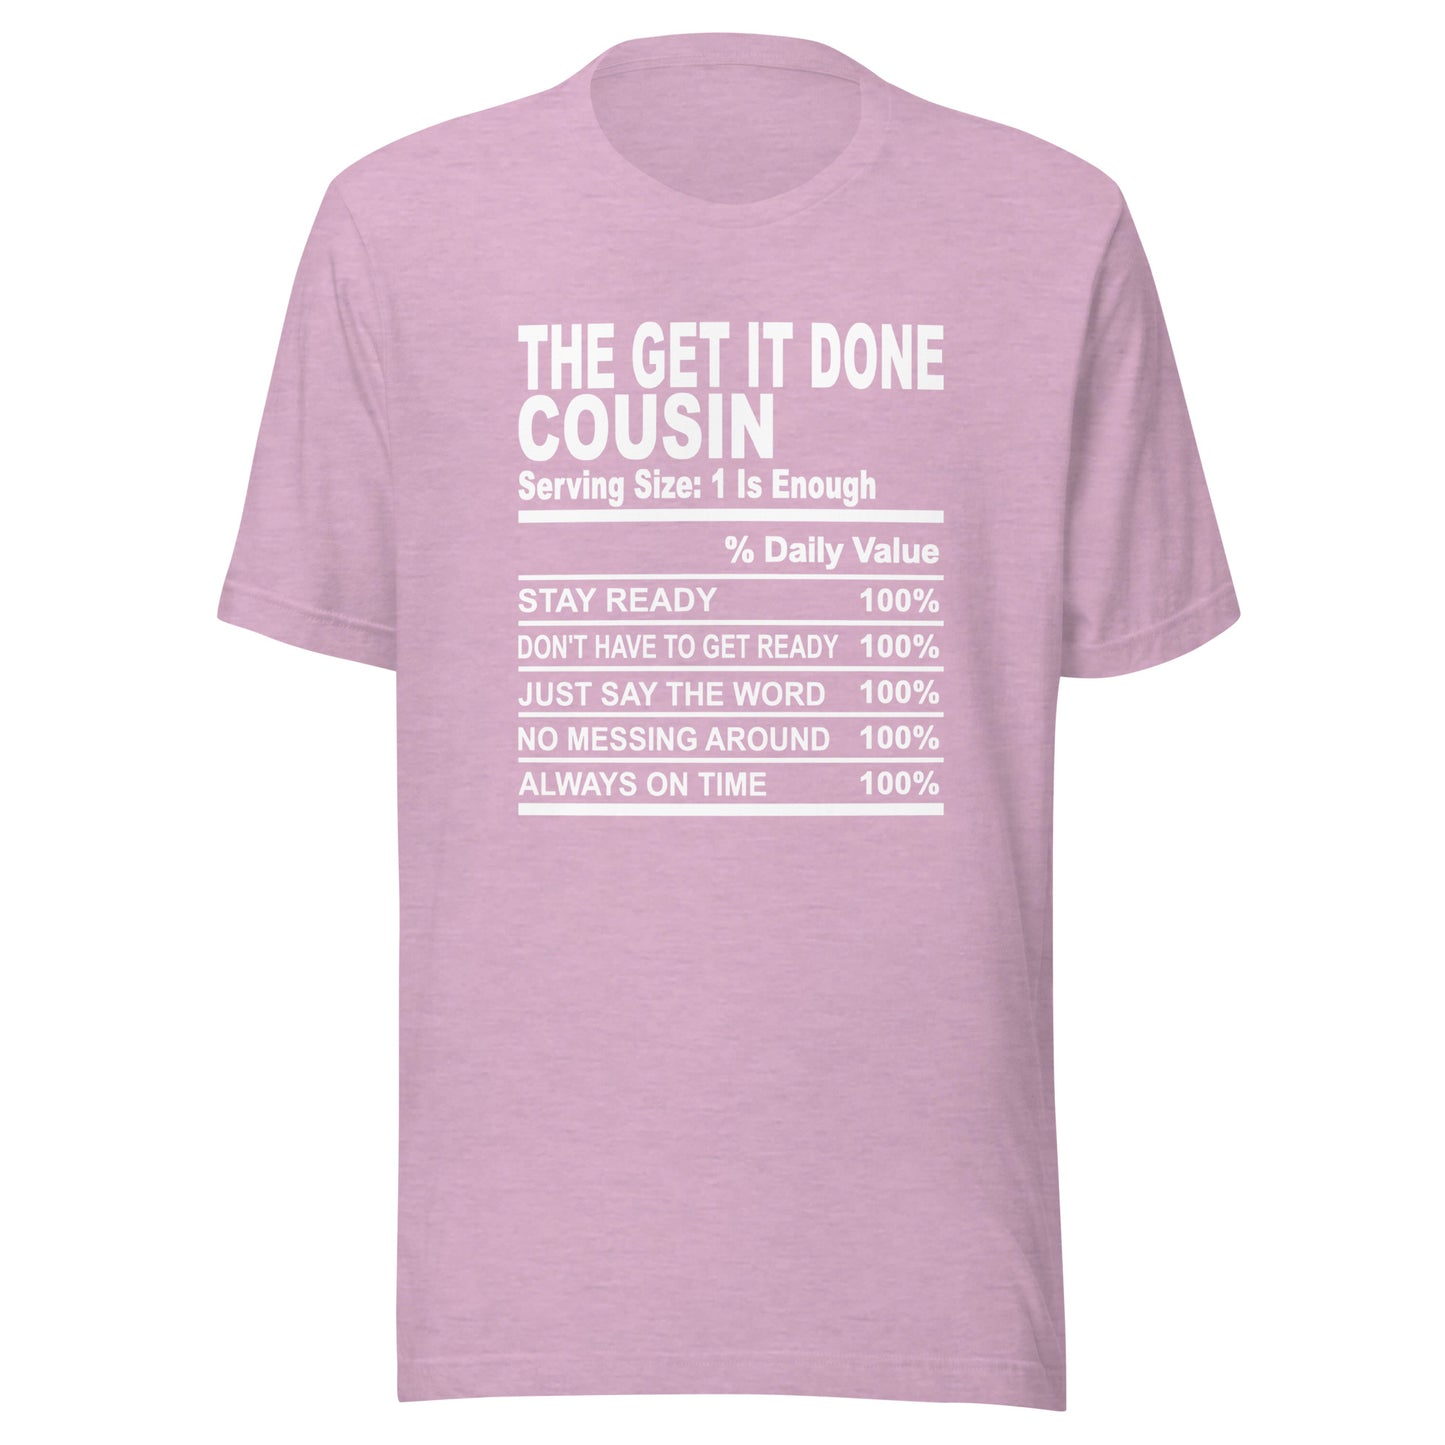 THE GET IT DONE COUSIN - S-M - Unisex T-Shirt (white print)